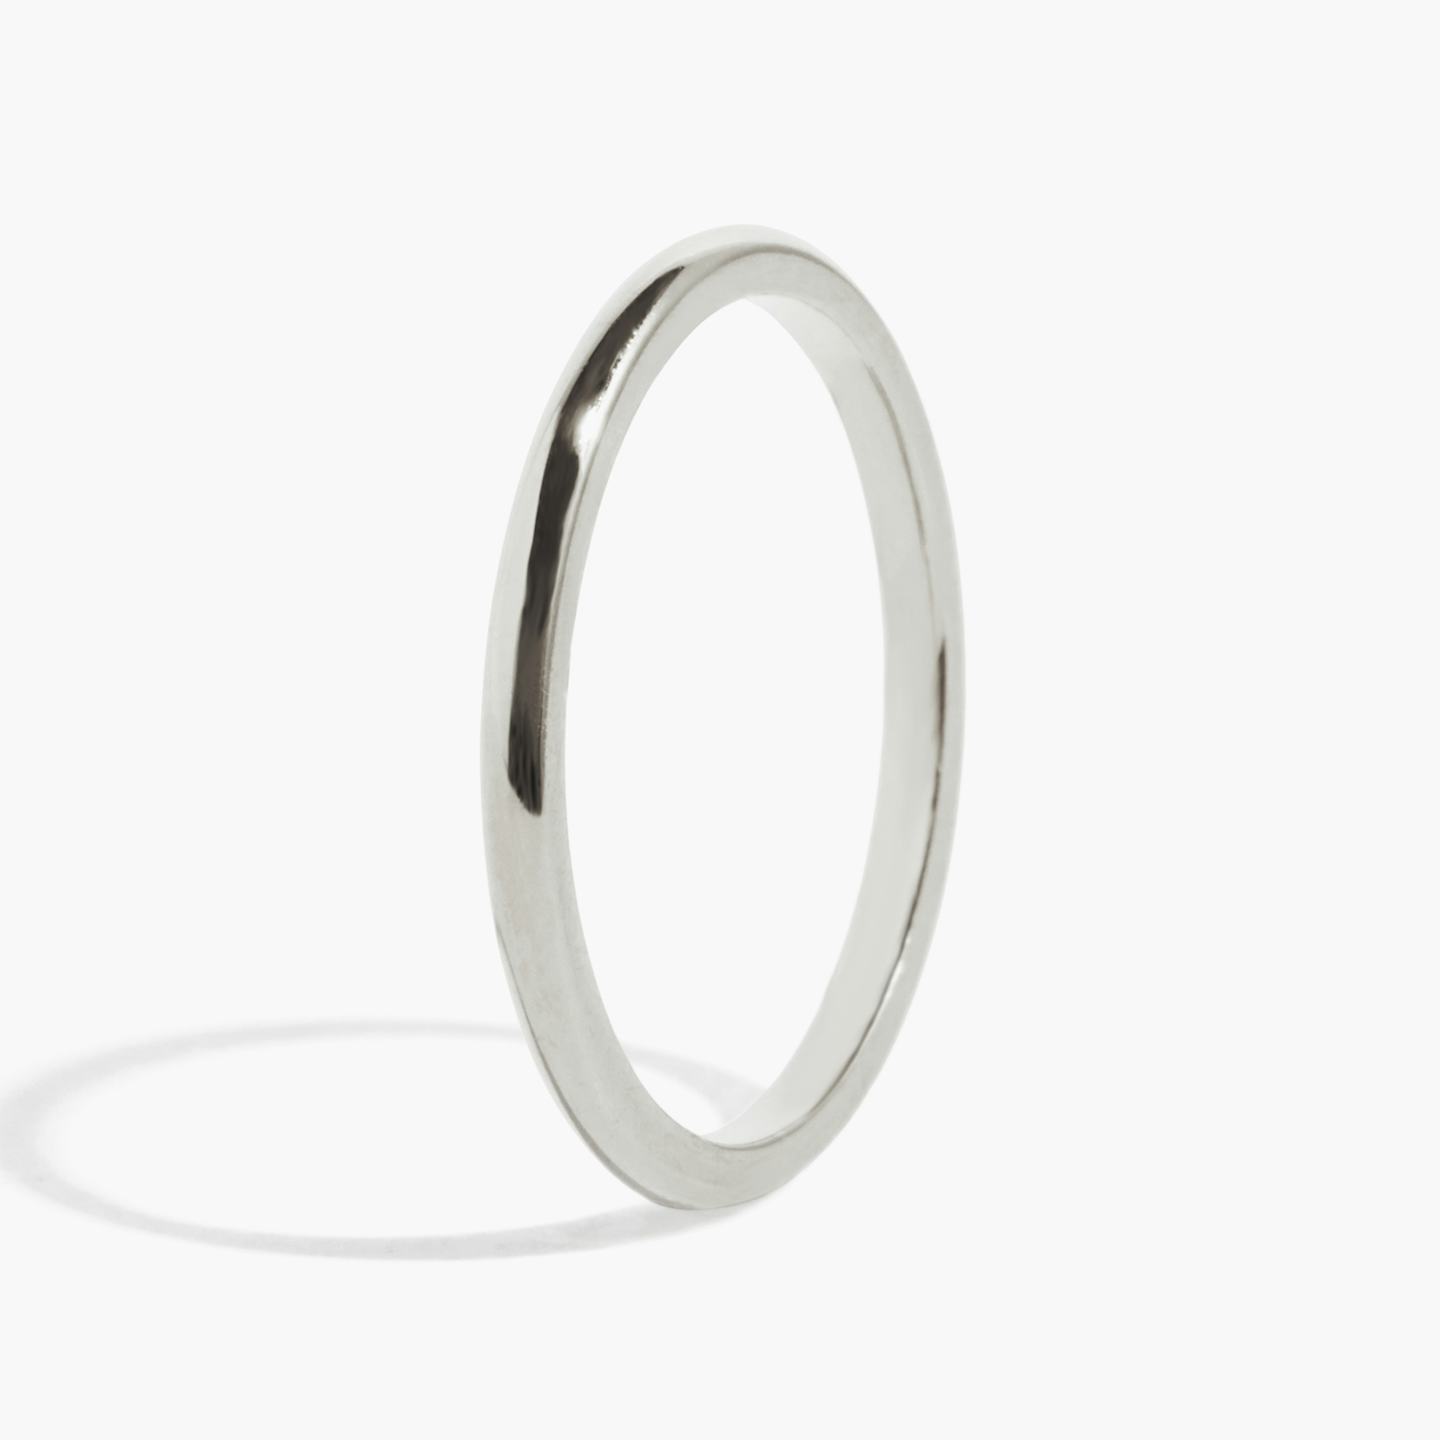 The Round | 18k | 18k White Gold | Band width: Small - 1.5mm